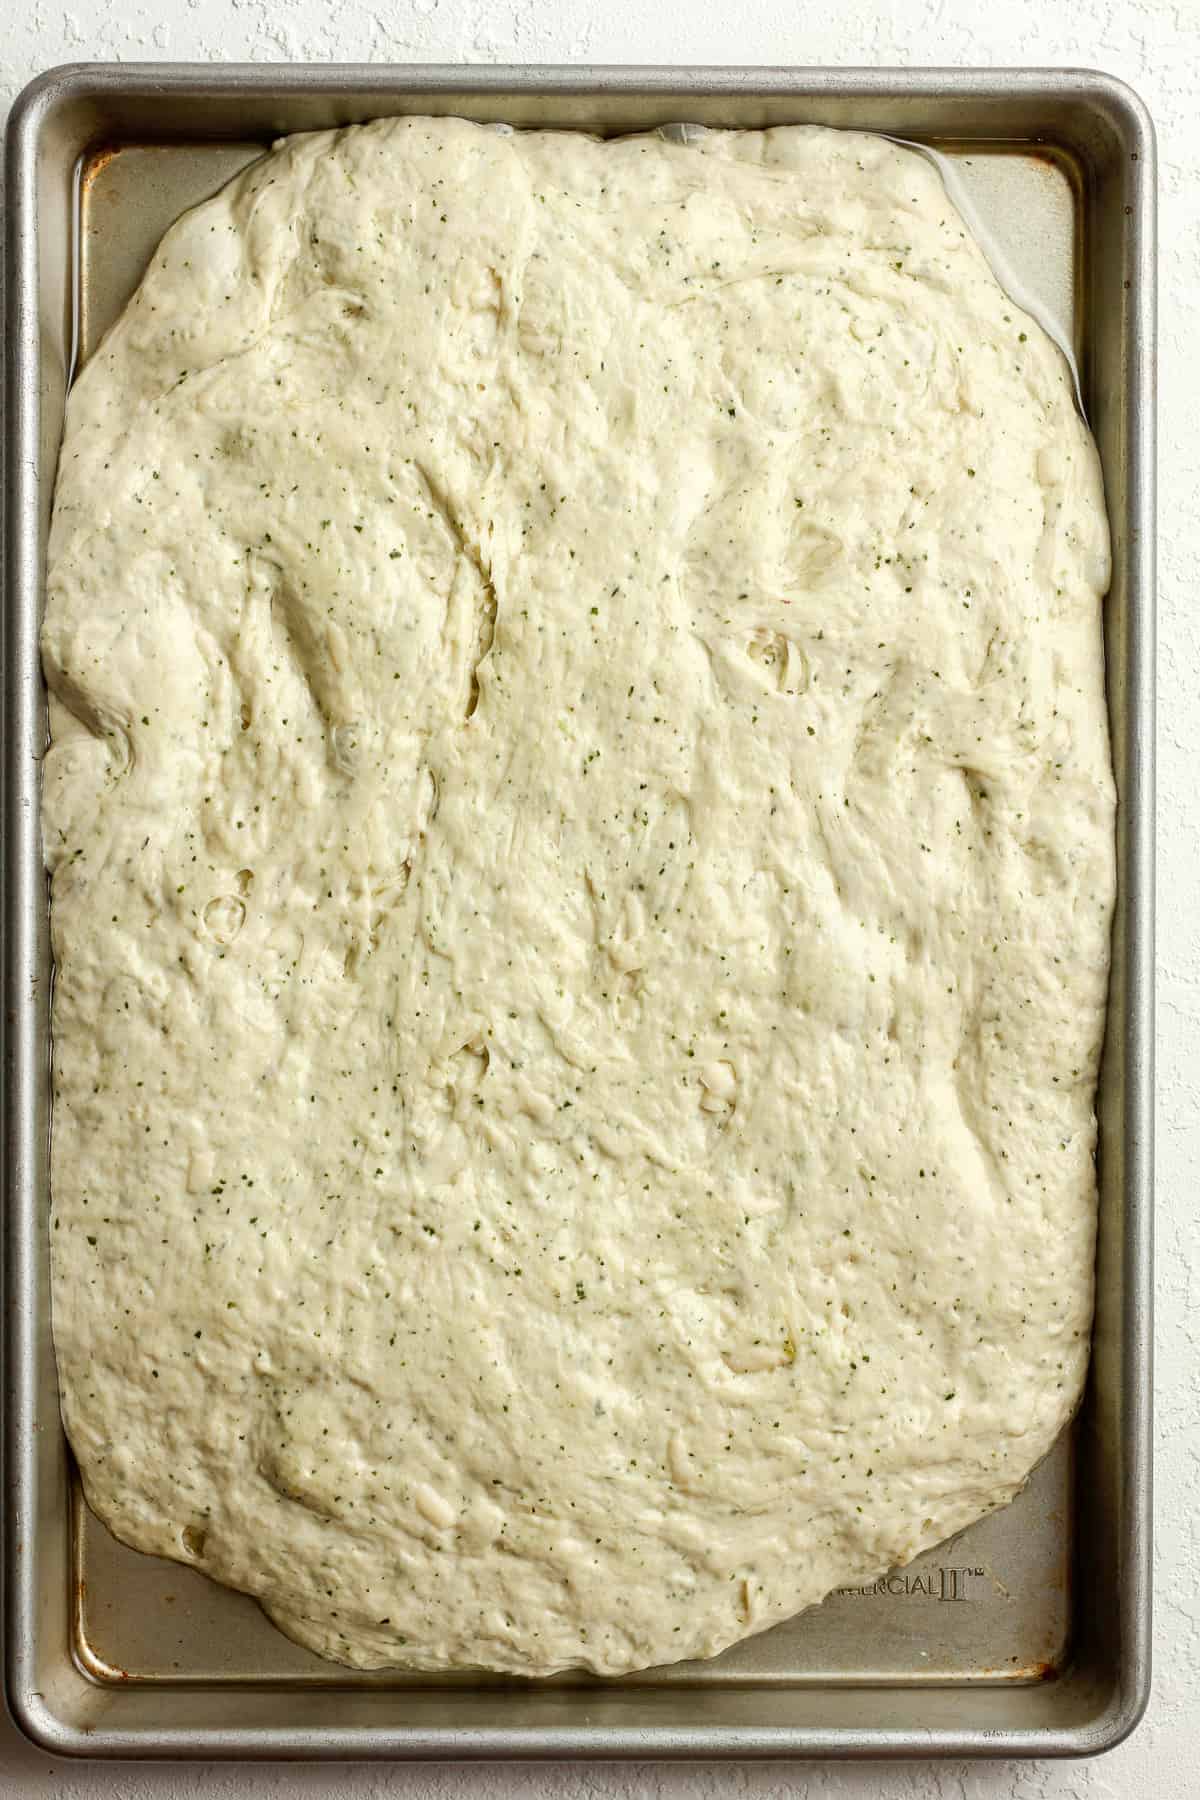 A pan of sourdough spread out in a pan.